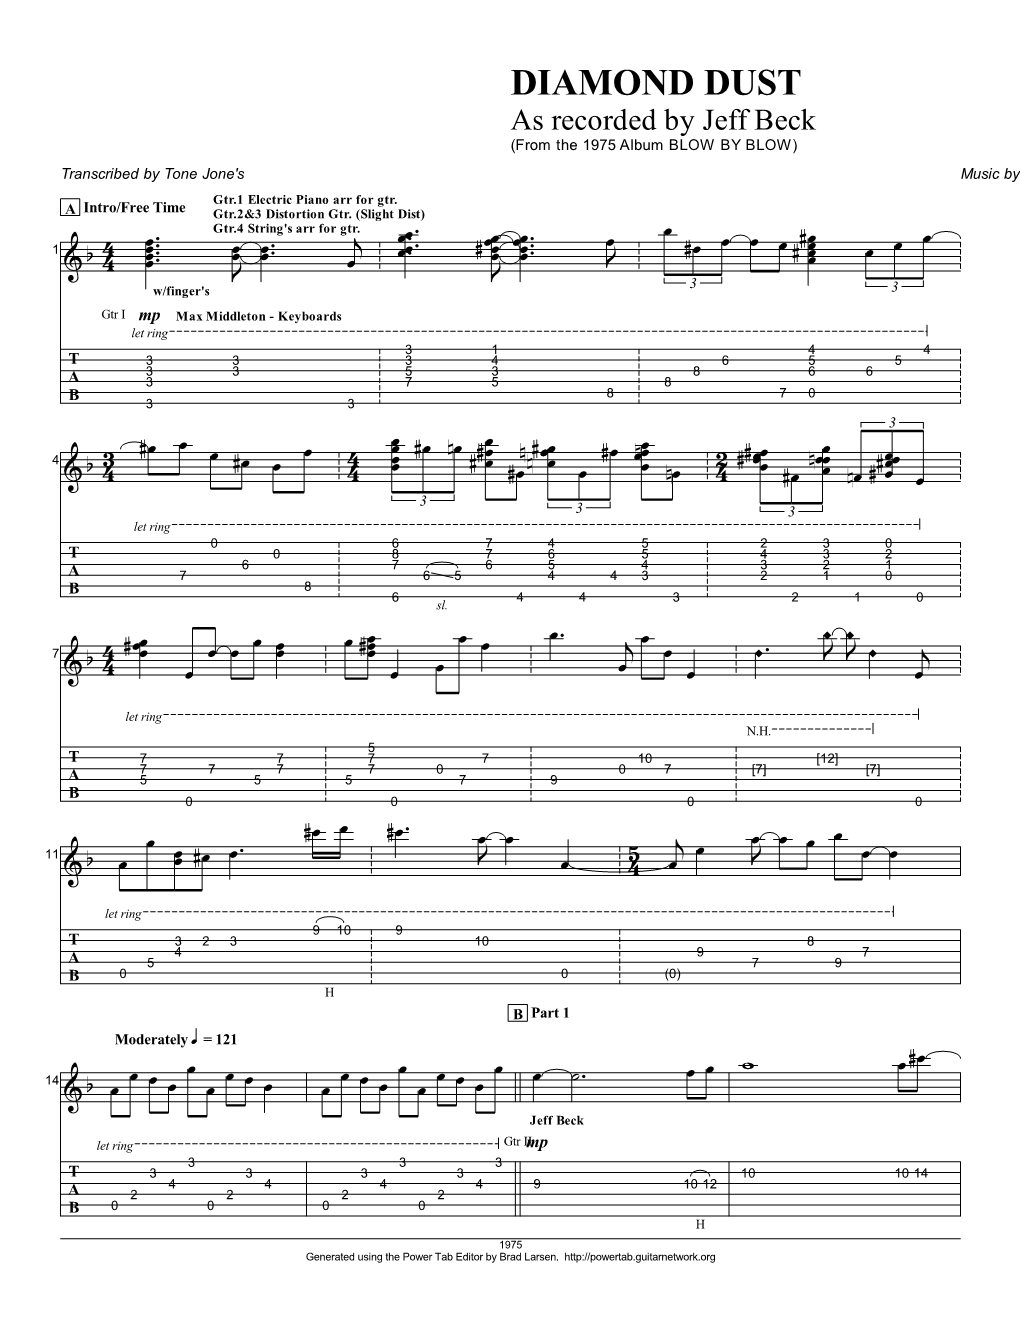 Jeff Beck (From the 1975 Album BLOW by BLOW) Transcribed by Tone Jone's Music by Bernie Holland Gtr.1 Electric Piano Arr for Gtr